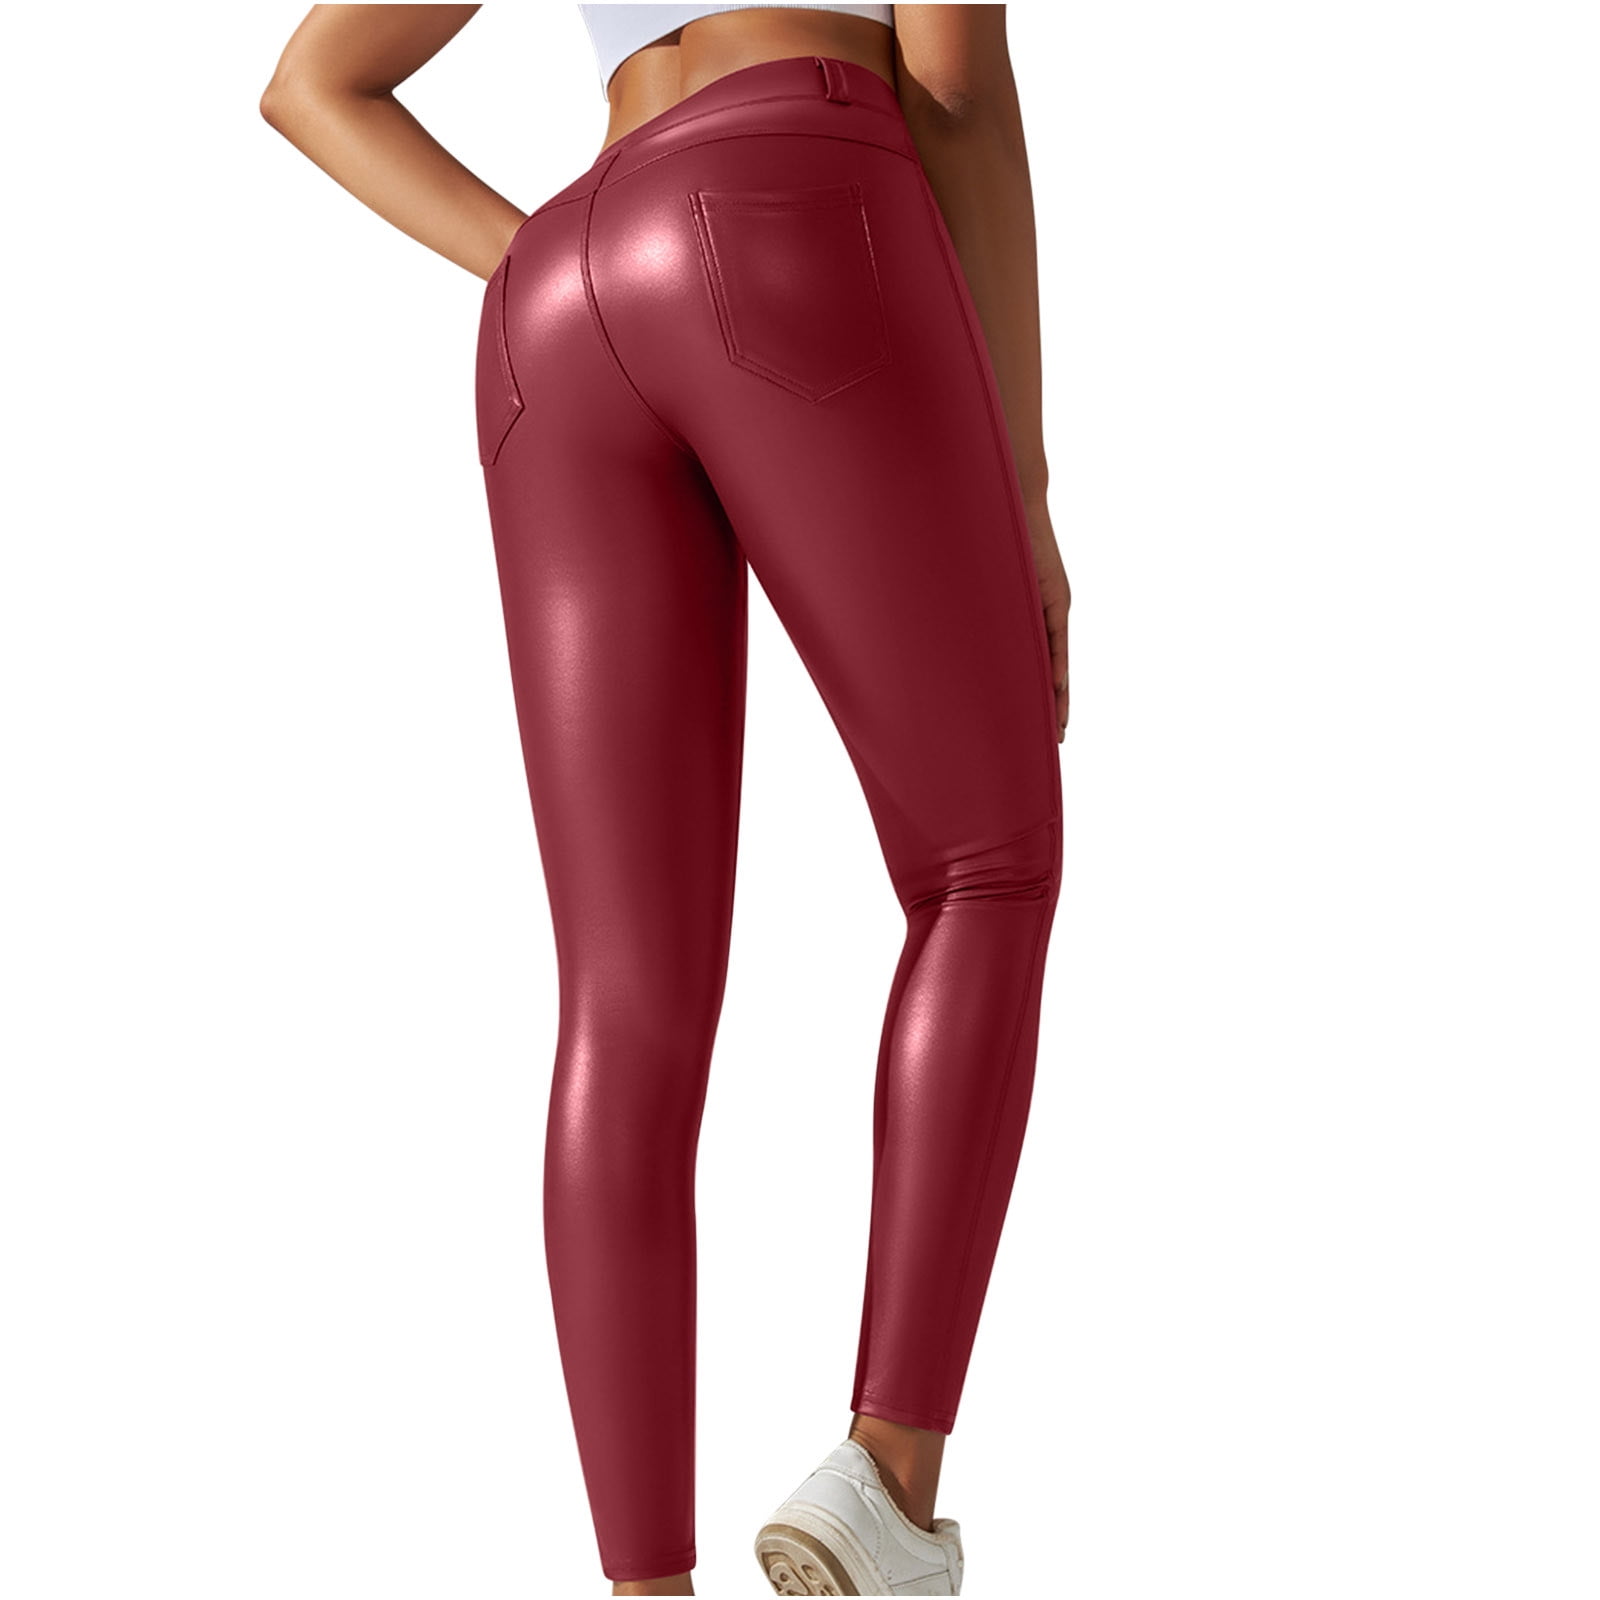 Faux Leather Leggings for Women High Waist Butt Lifting Sexy Pleather Long  Pants Pocket Stretchy Fashion Tights (X-Large, Red)